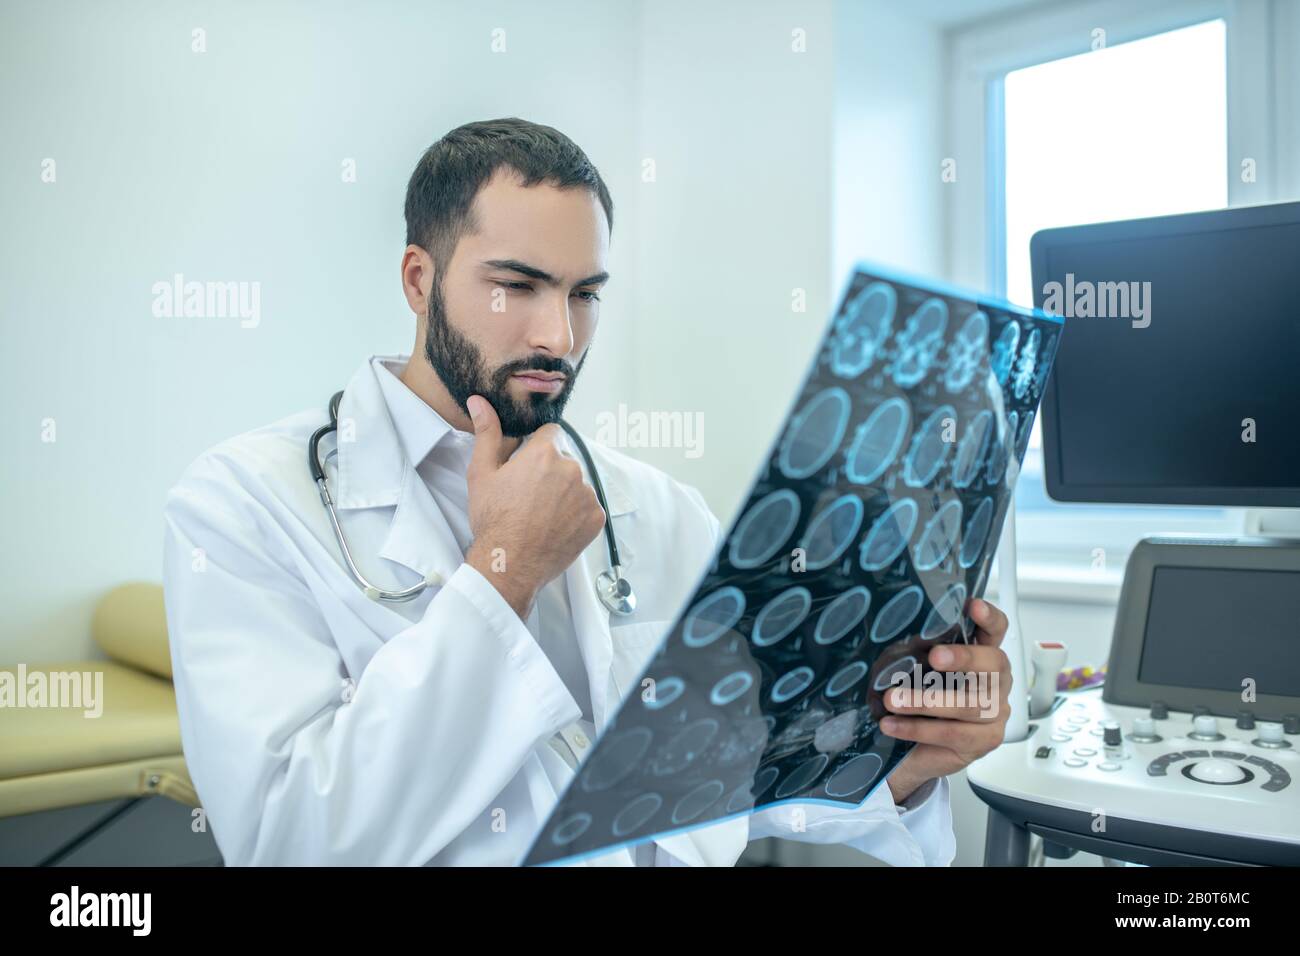 Male bearded doctor in a white robe analyzing MRI results looking serious Stock Photo